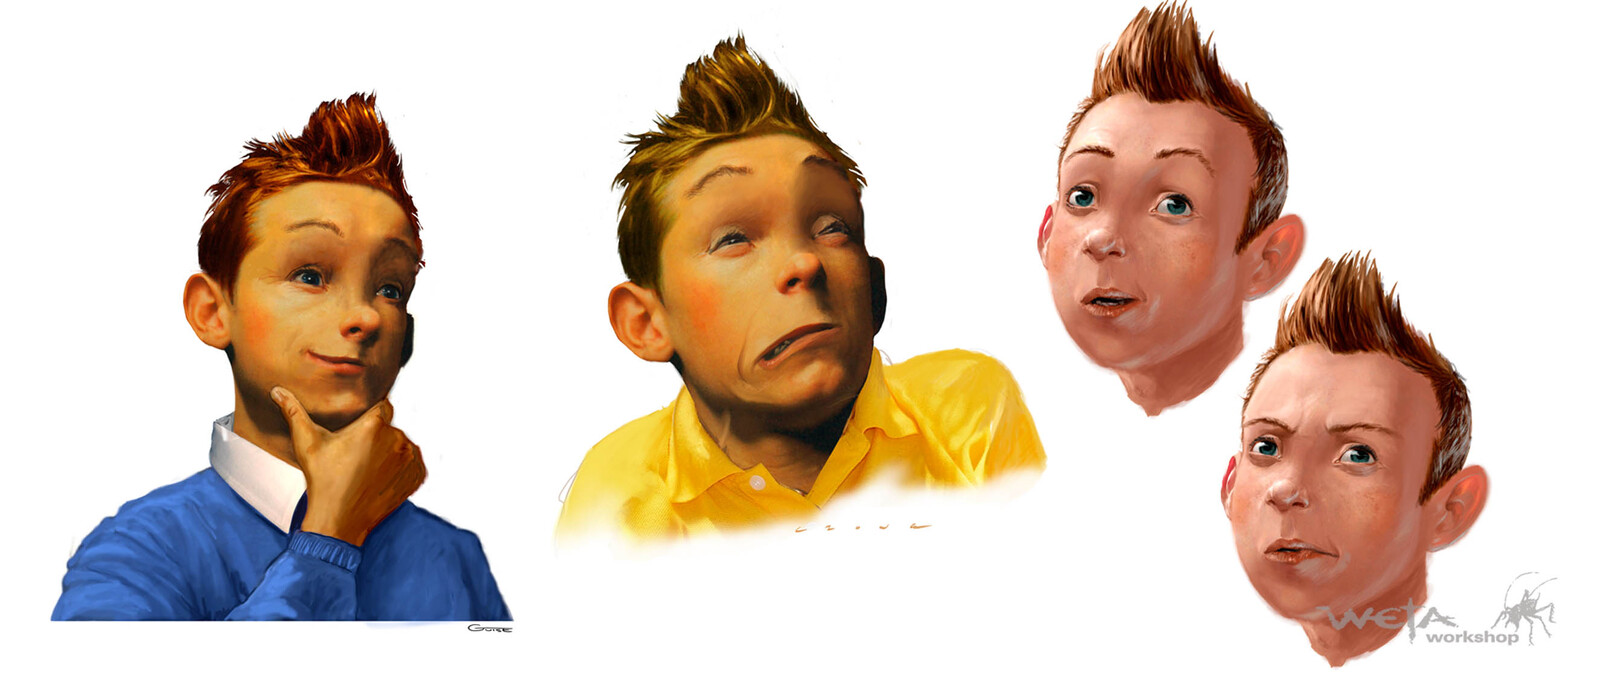 Tintin Expressions - Artist: Chris Guise and Stephen Crowe